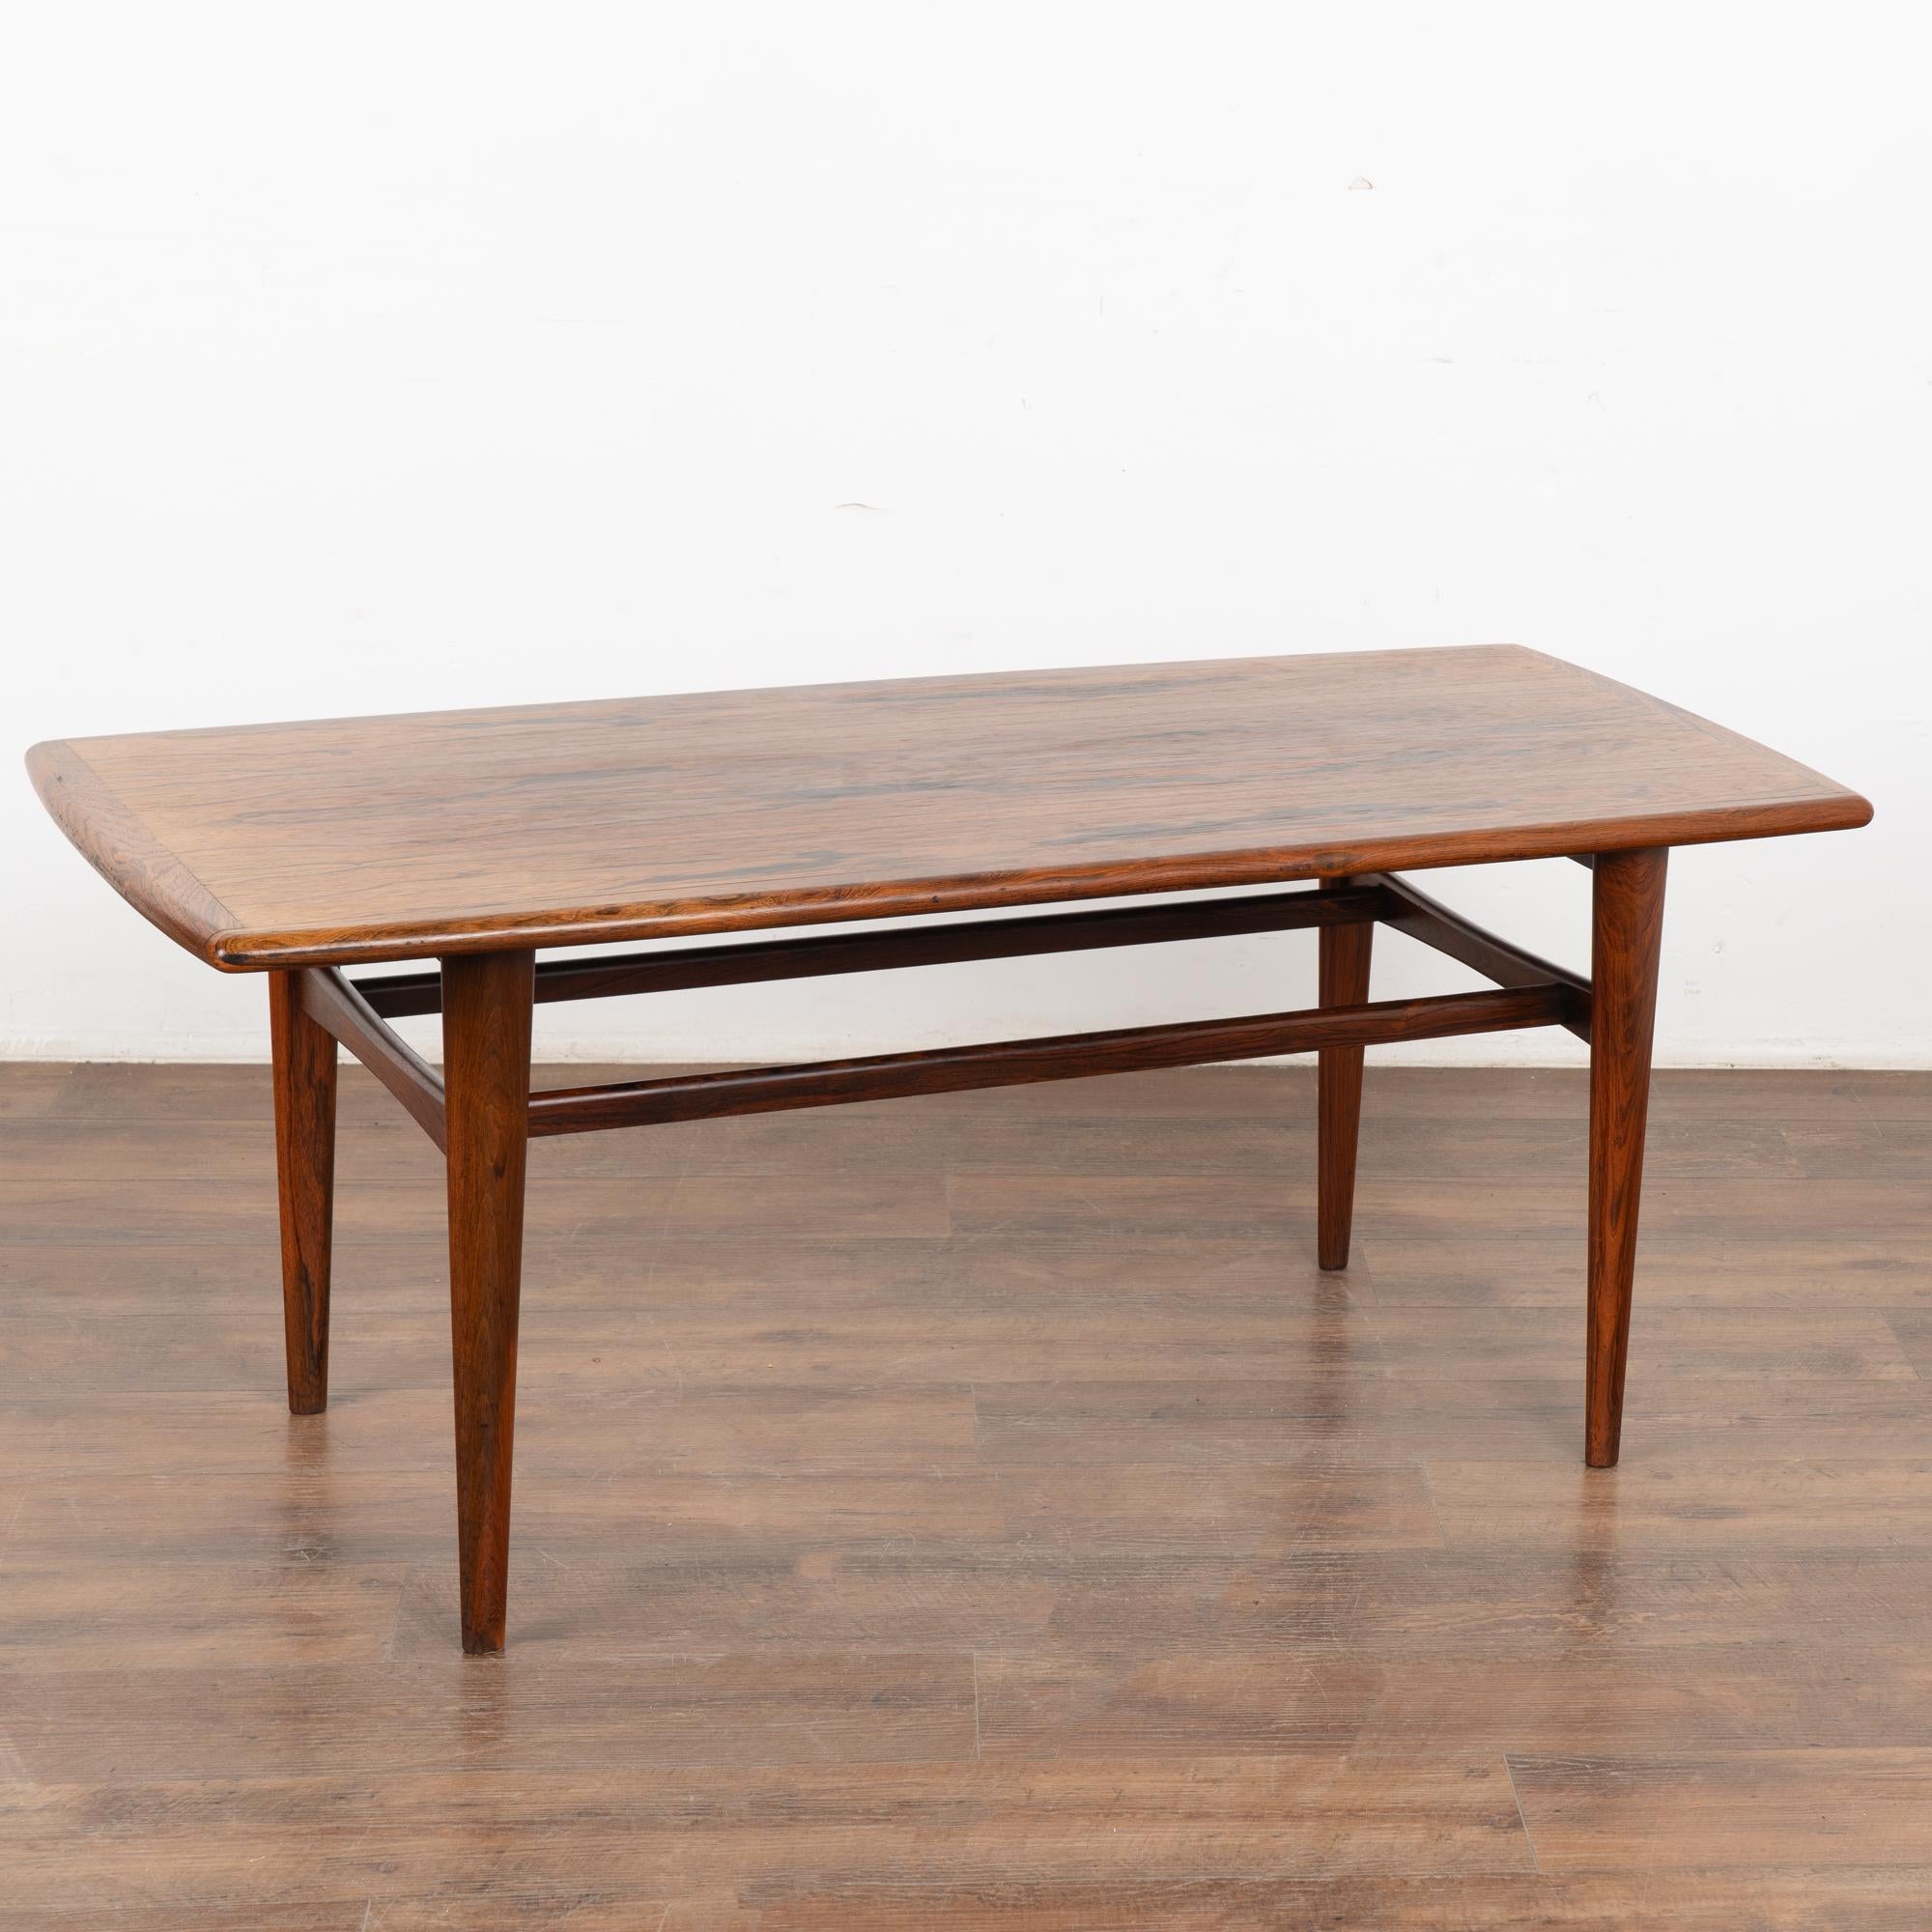 Classic clean lines are the highlight of this mid century modern coffee table from Denmark, along with the striking wood grain that creates the attractive top.
Any small nicks, scratches, signs of wear are commensurate with age and do not detract